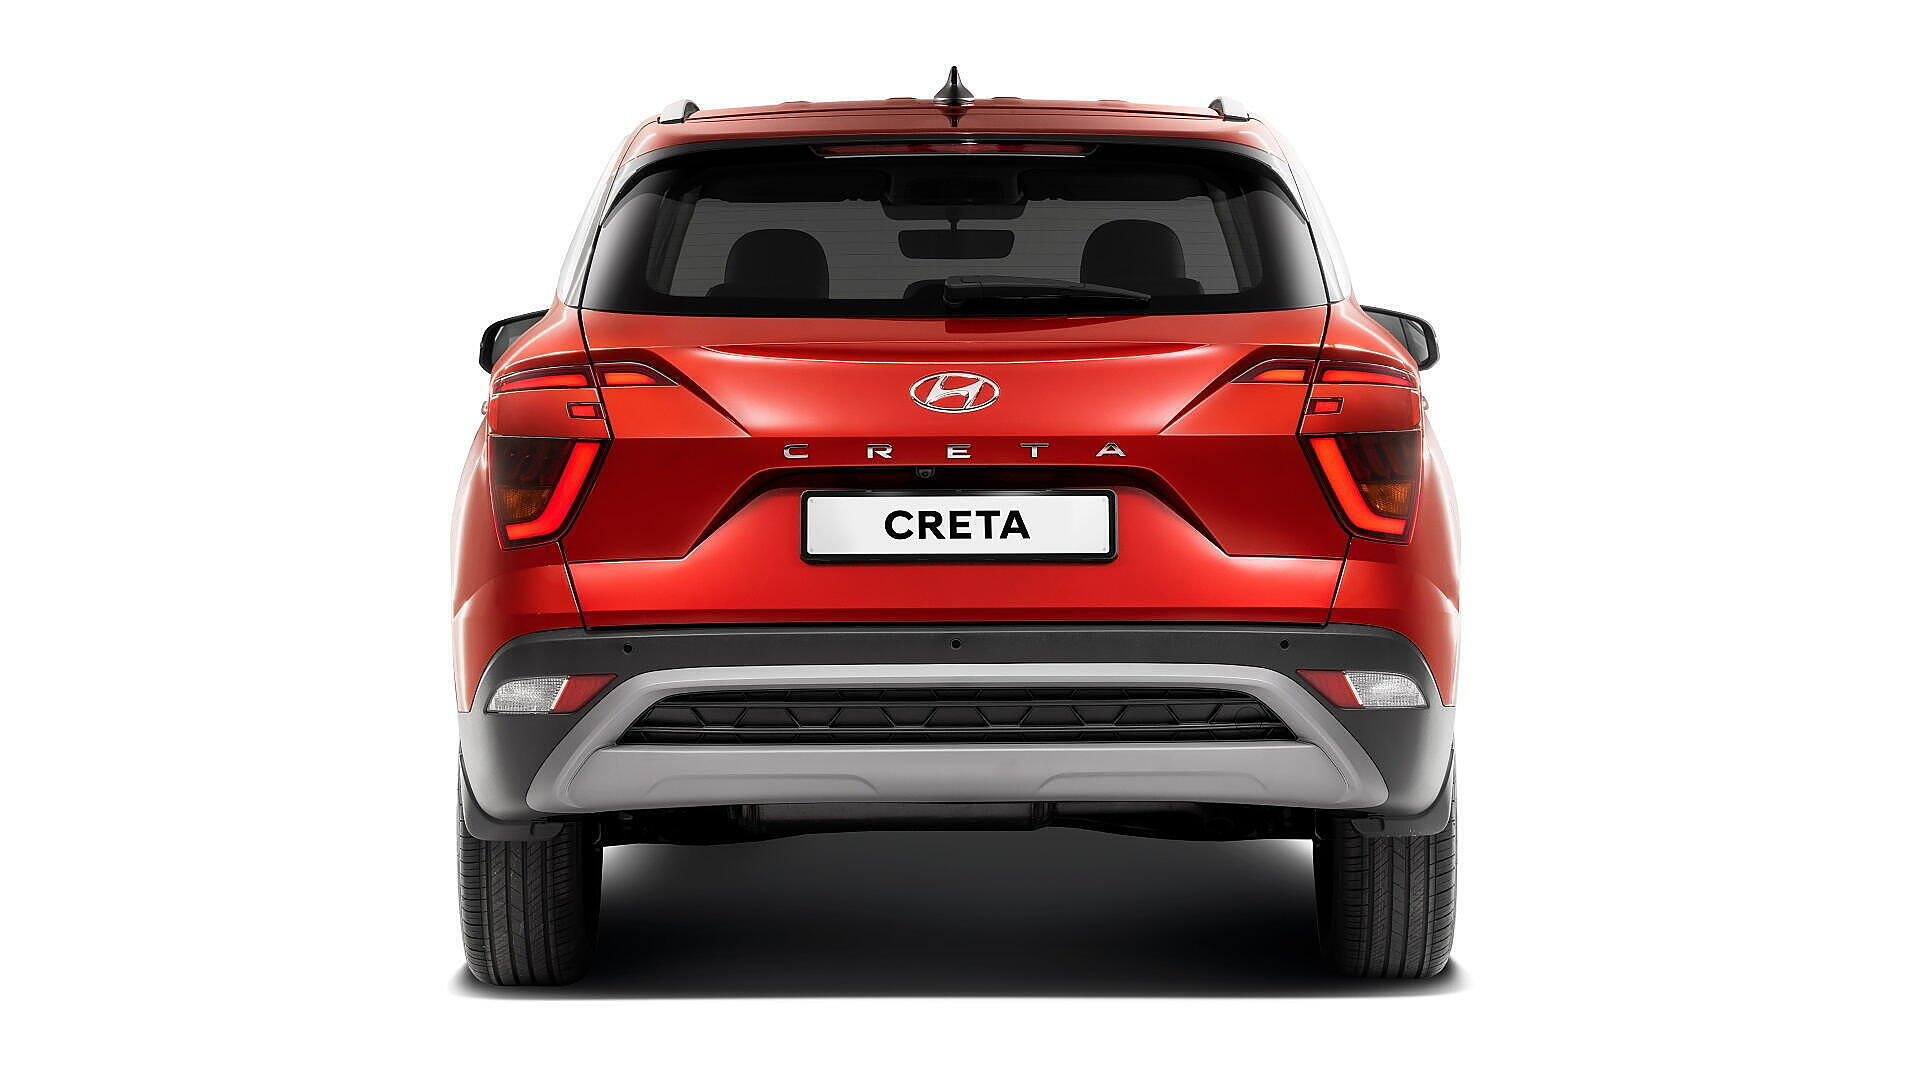 Hyundai Creta Facelift Launch Date, Expected Price Rs. 11.00 Lakh, Images & More Updates - CarWale